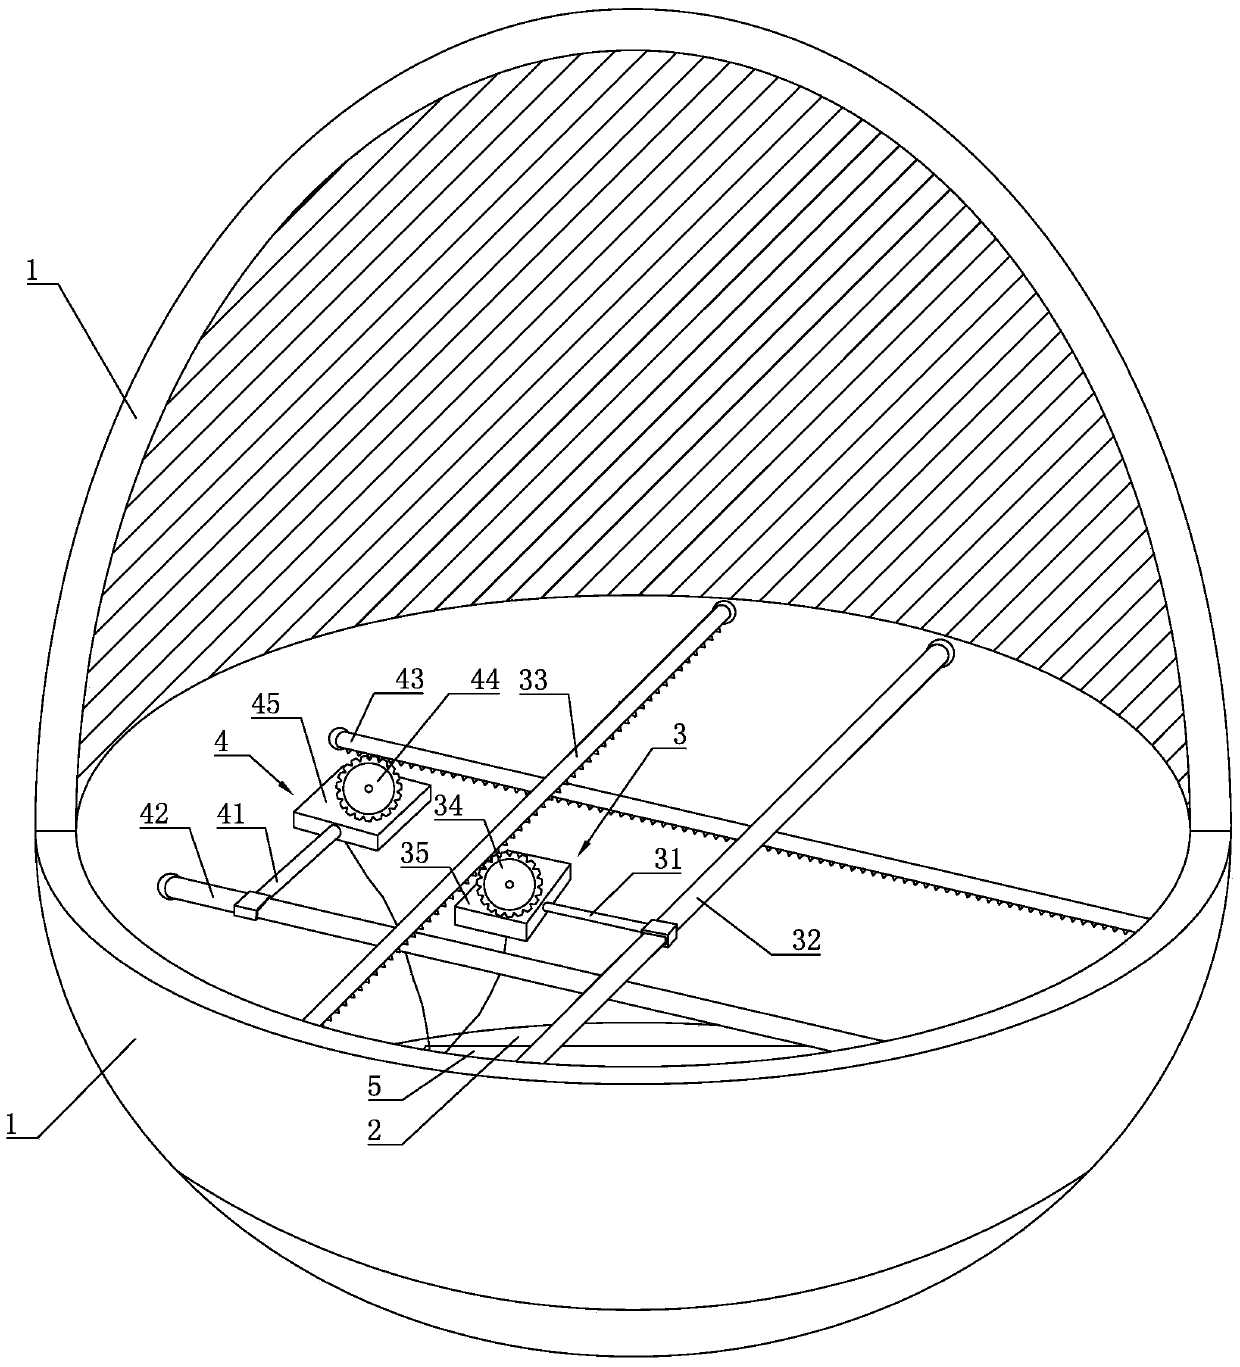 A tumbler with a controllable center of gravity and a method for controlling the center of gravity of the tumbler